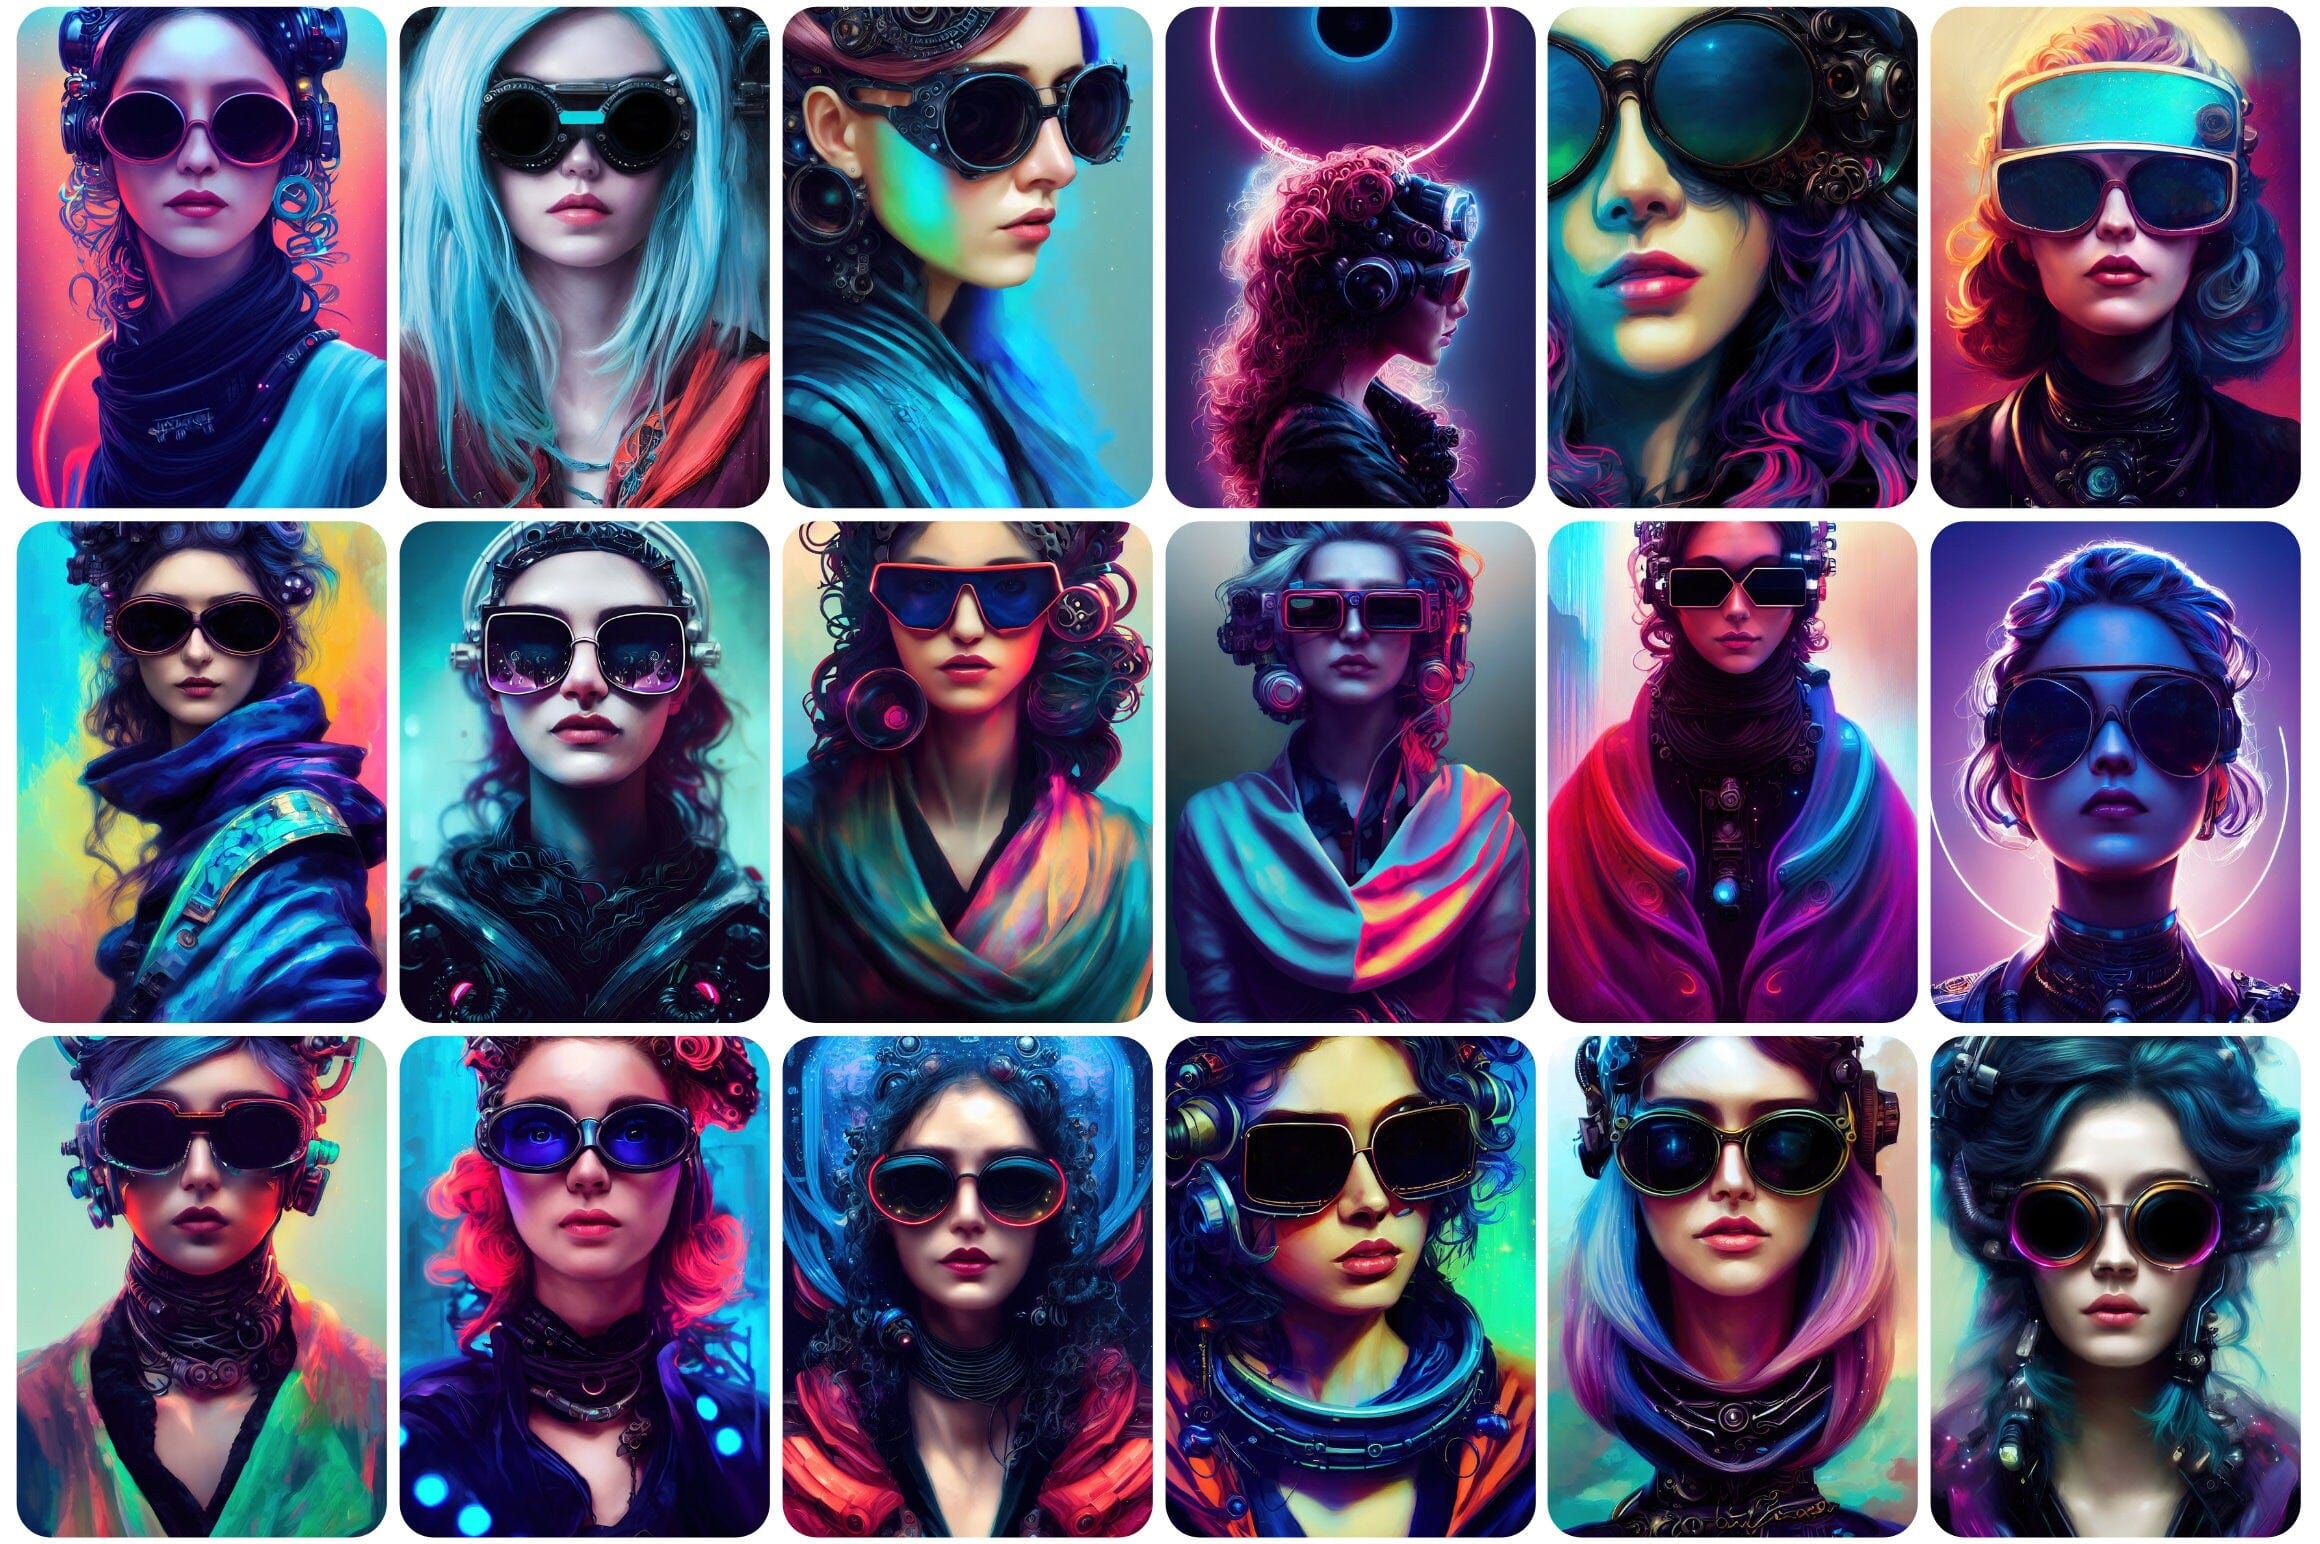 250 Printable Futuristic Cyber Woman Images - Perfect for Graphic Design, Sci-Fi Art, and Digital Projects - Cyberpunk-Inspired Women Digital Download Sumobundle